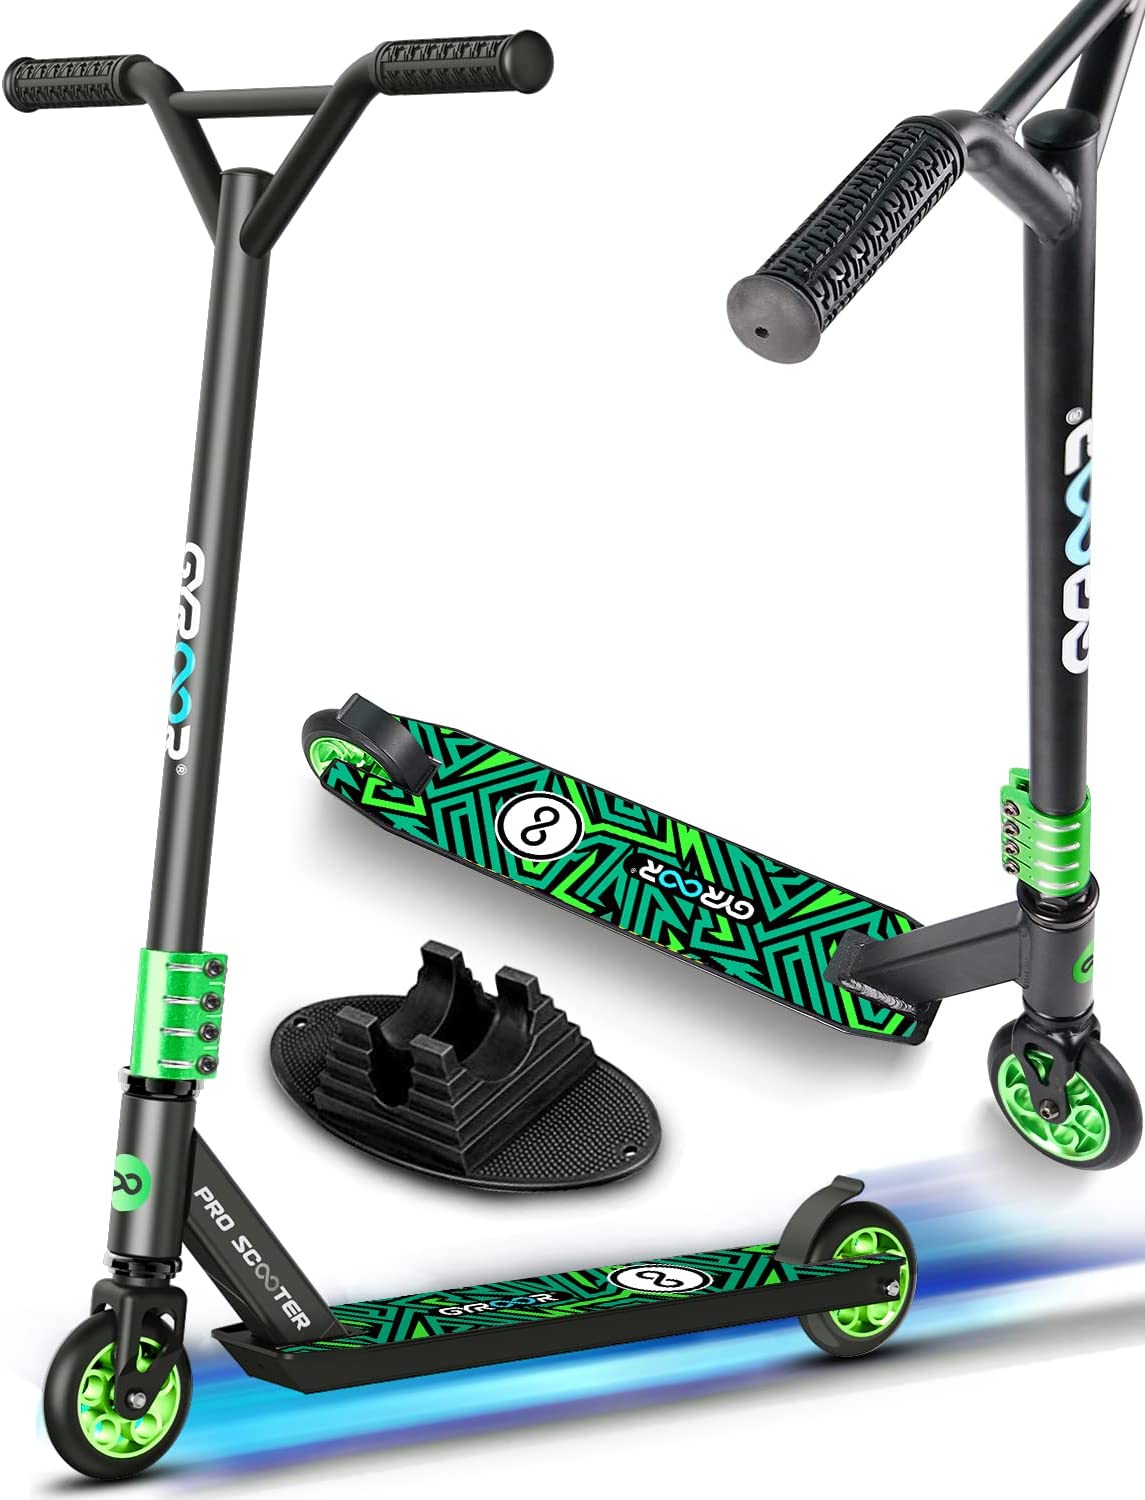 Pro scooter - stunt scooter - trick scooter - Gyroor Z1 scooter - green